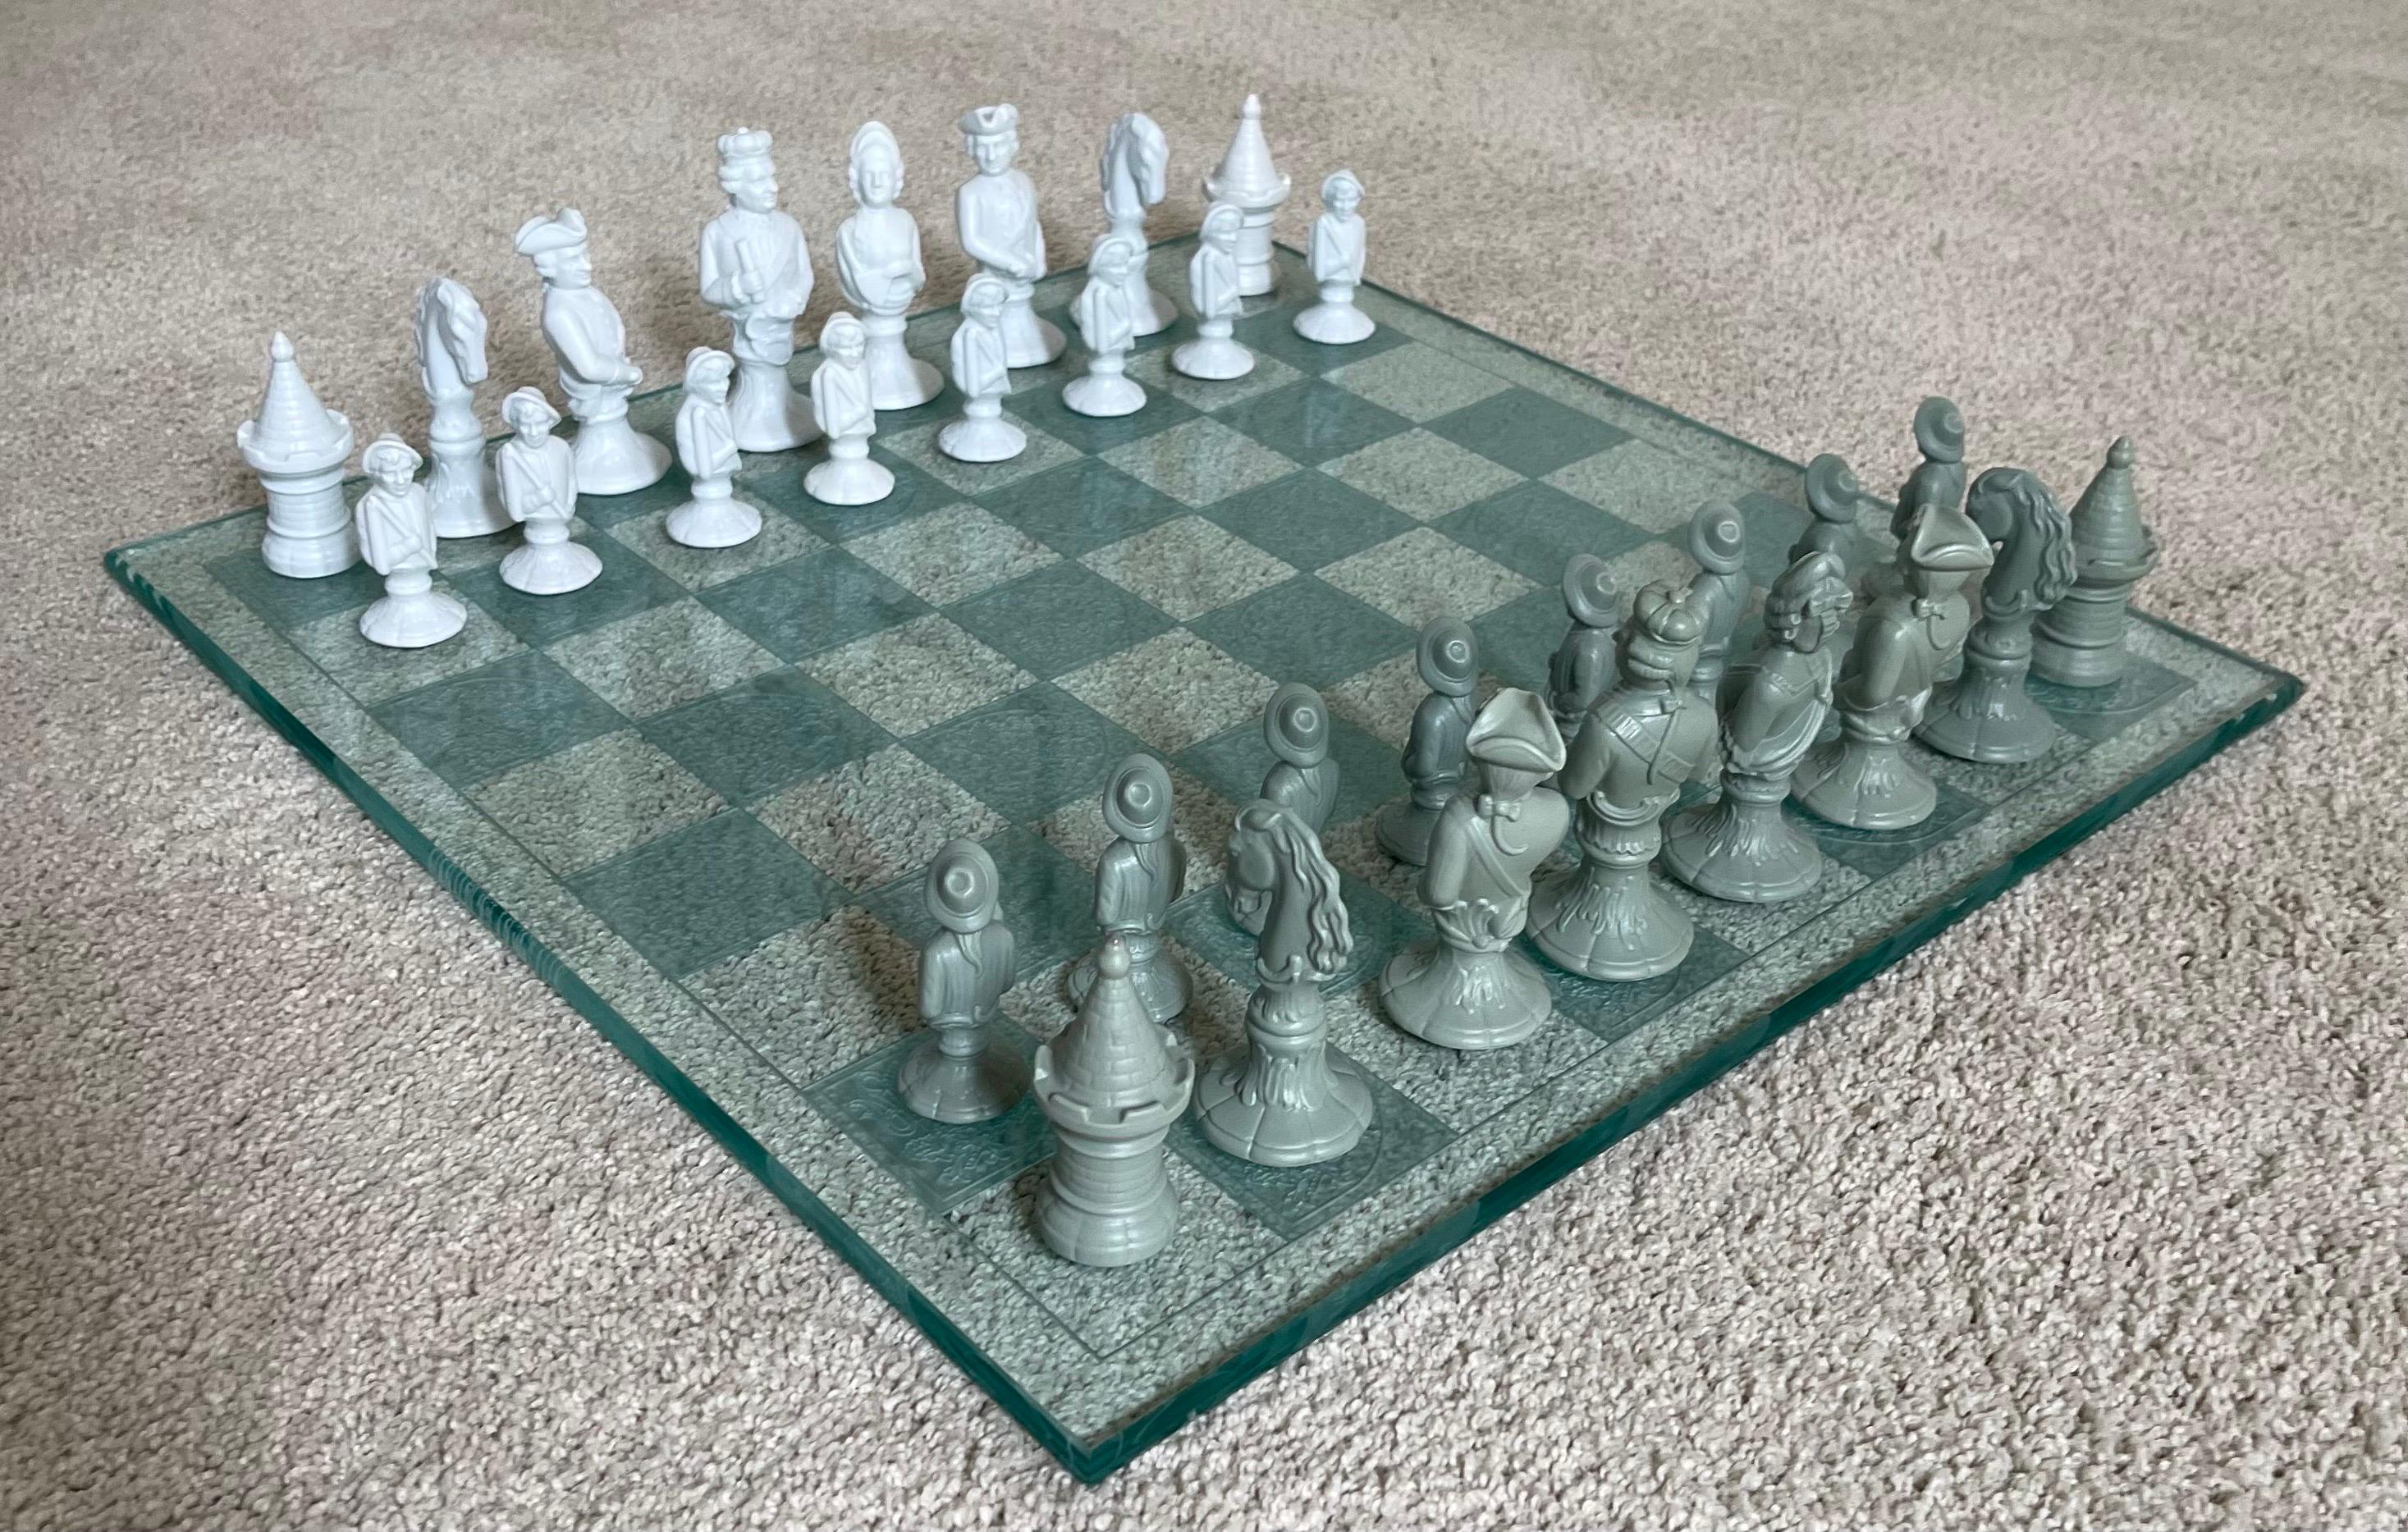 Vintage Bisque Porcelain Chess Set with Etched Glass Board by Furstenberg  For Sale 12